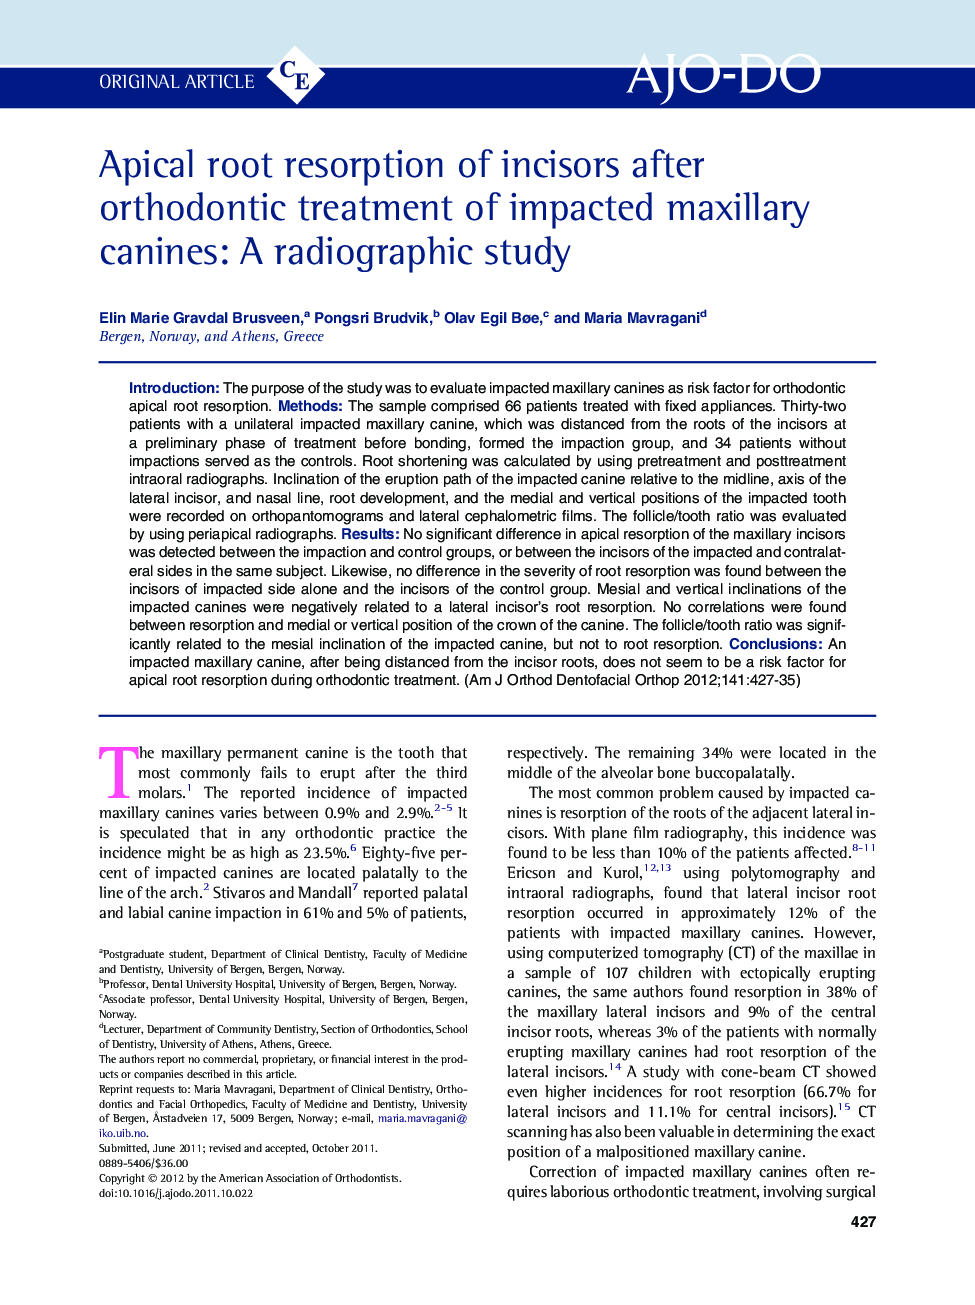 Apical root resorption of incisors after orthodontic treatment of impacted maxillary canines: A radiographic study 